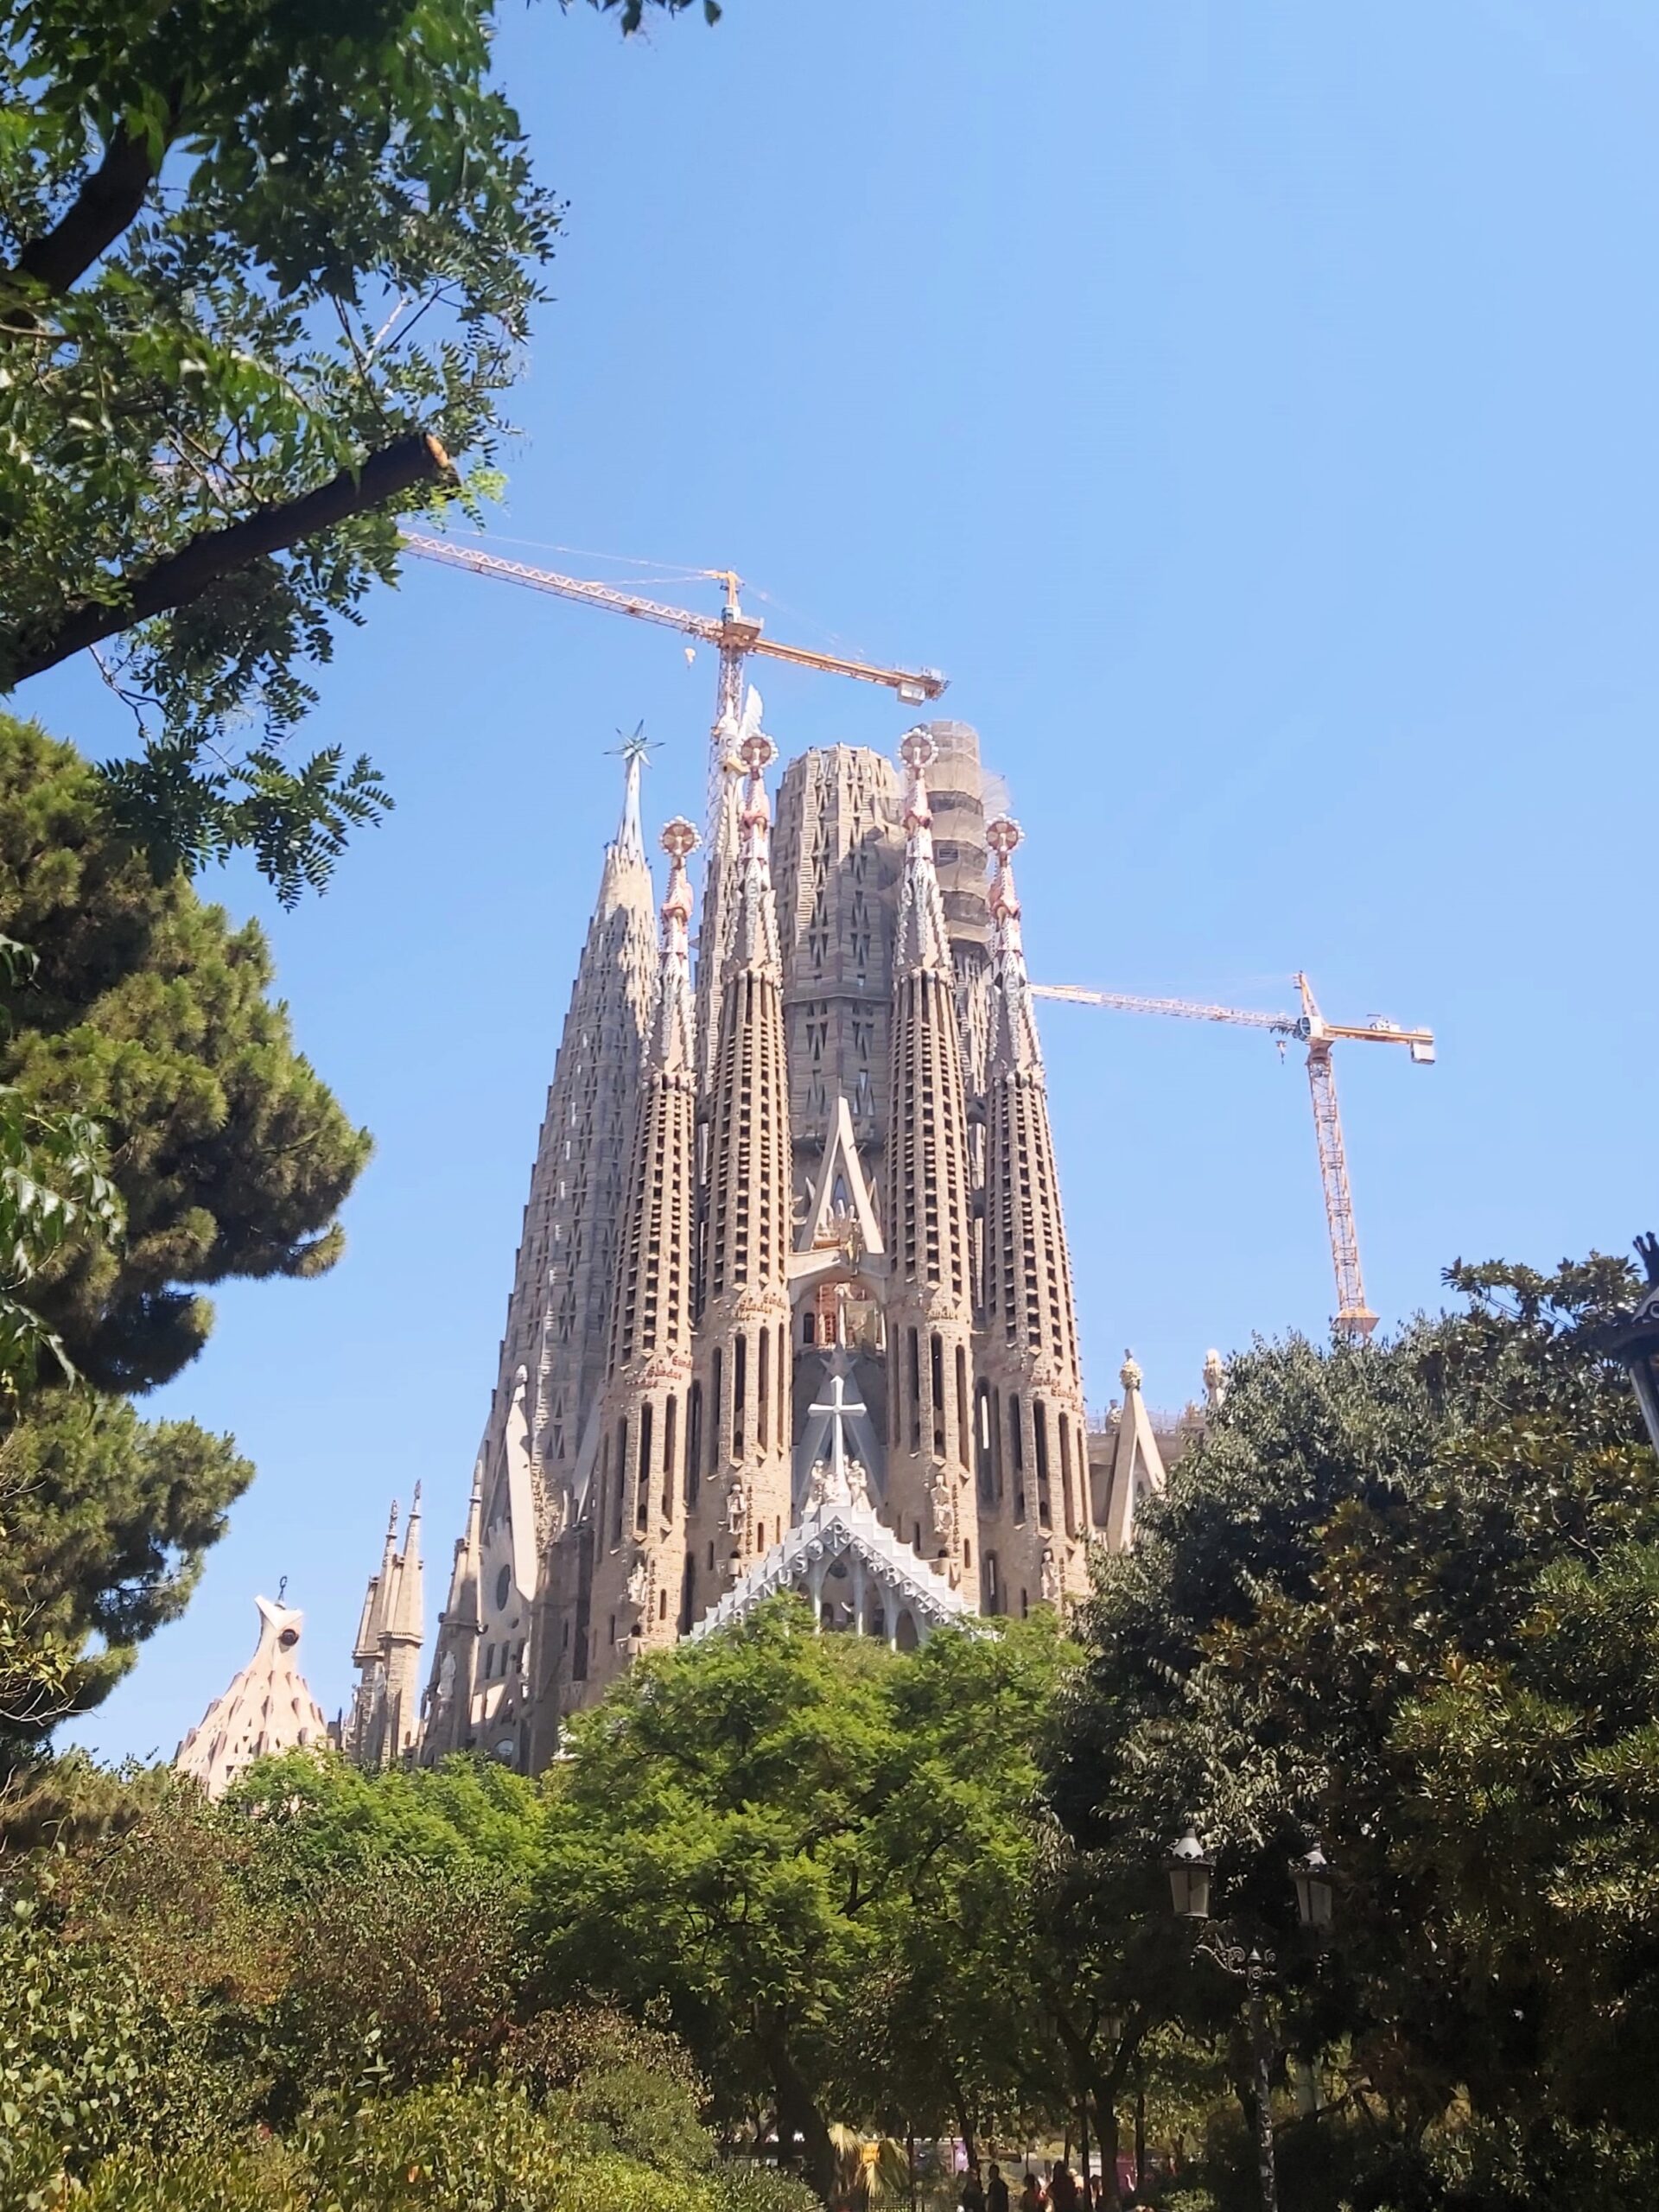 Sagrada Familia and cranes towering above the trees in Barcelona, Spain